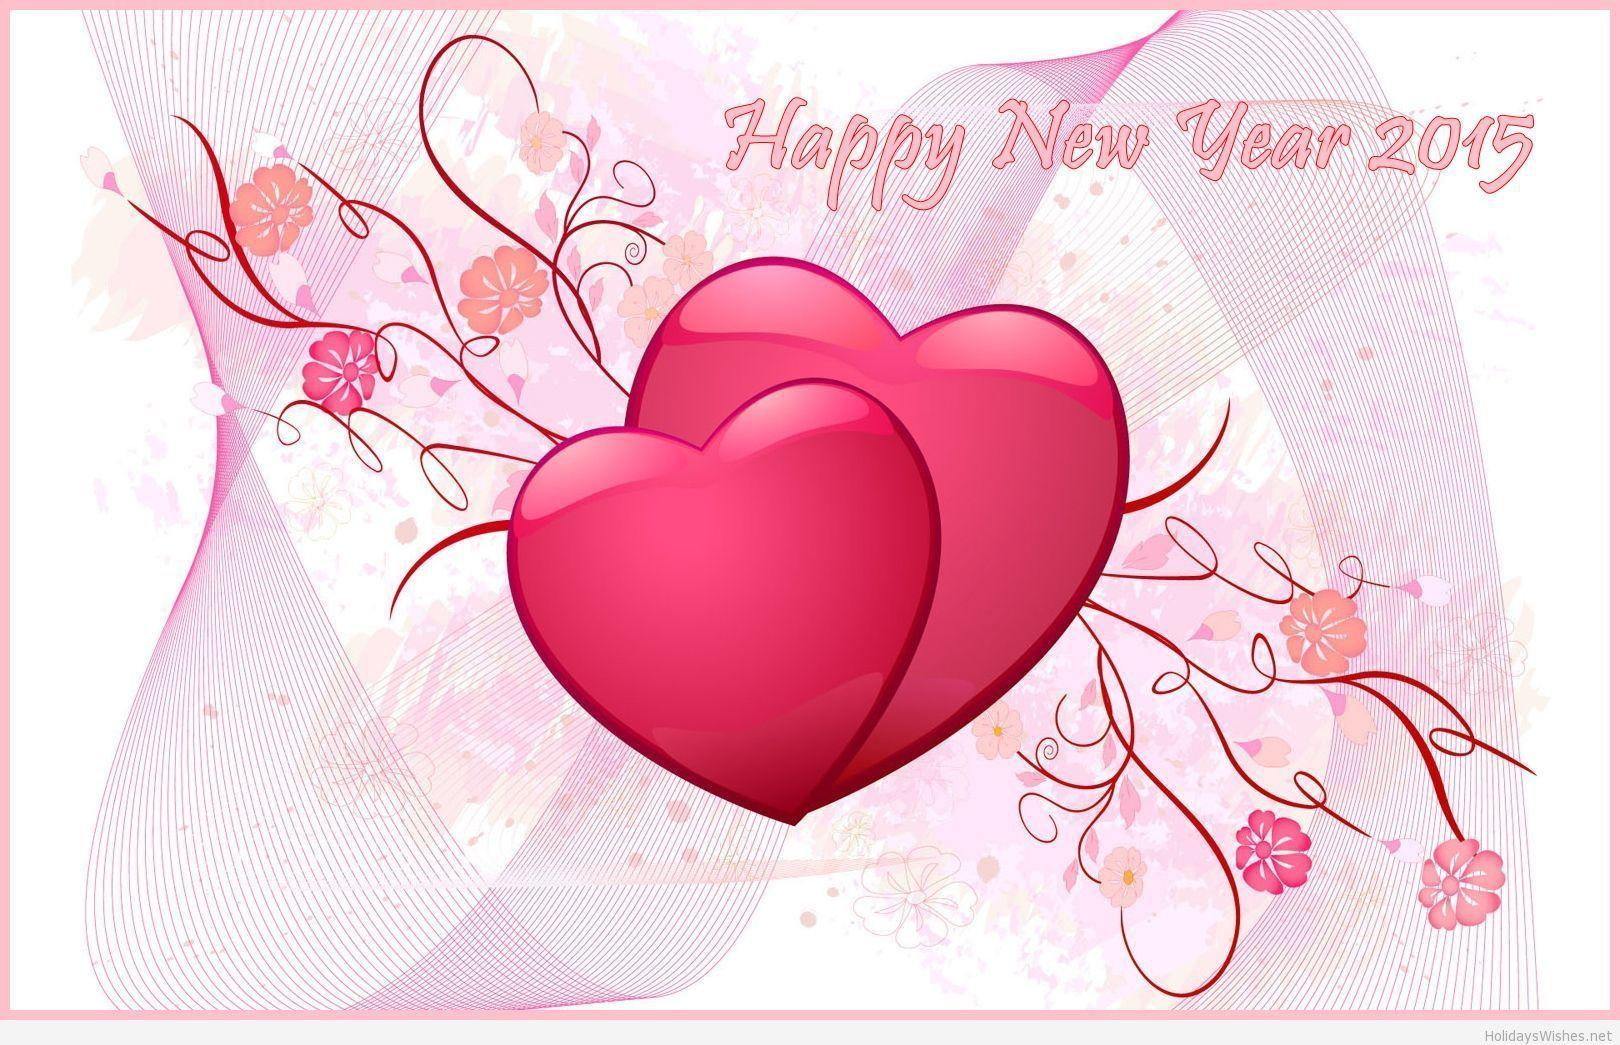 Nice love wallpaper for new year 2015